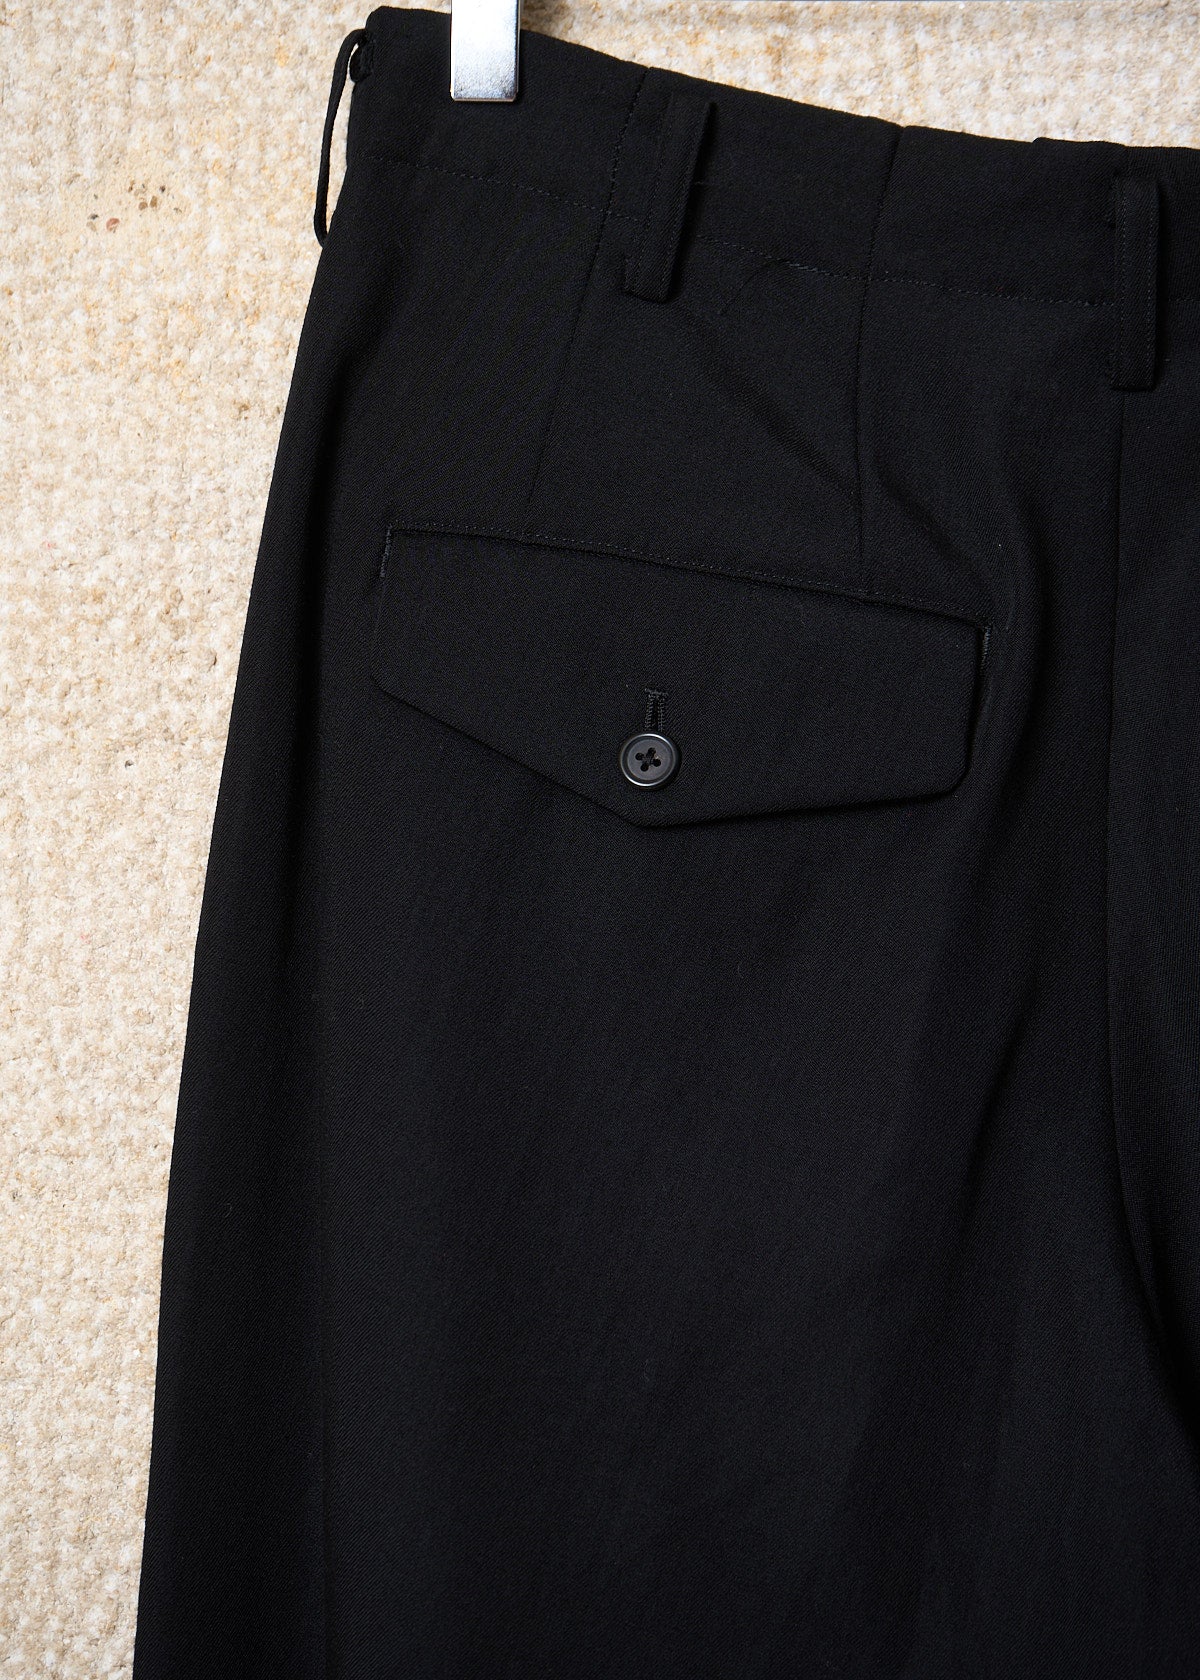 Y's For Men Navy Pleated Wool Pants SS1992 - Small